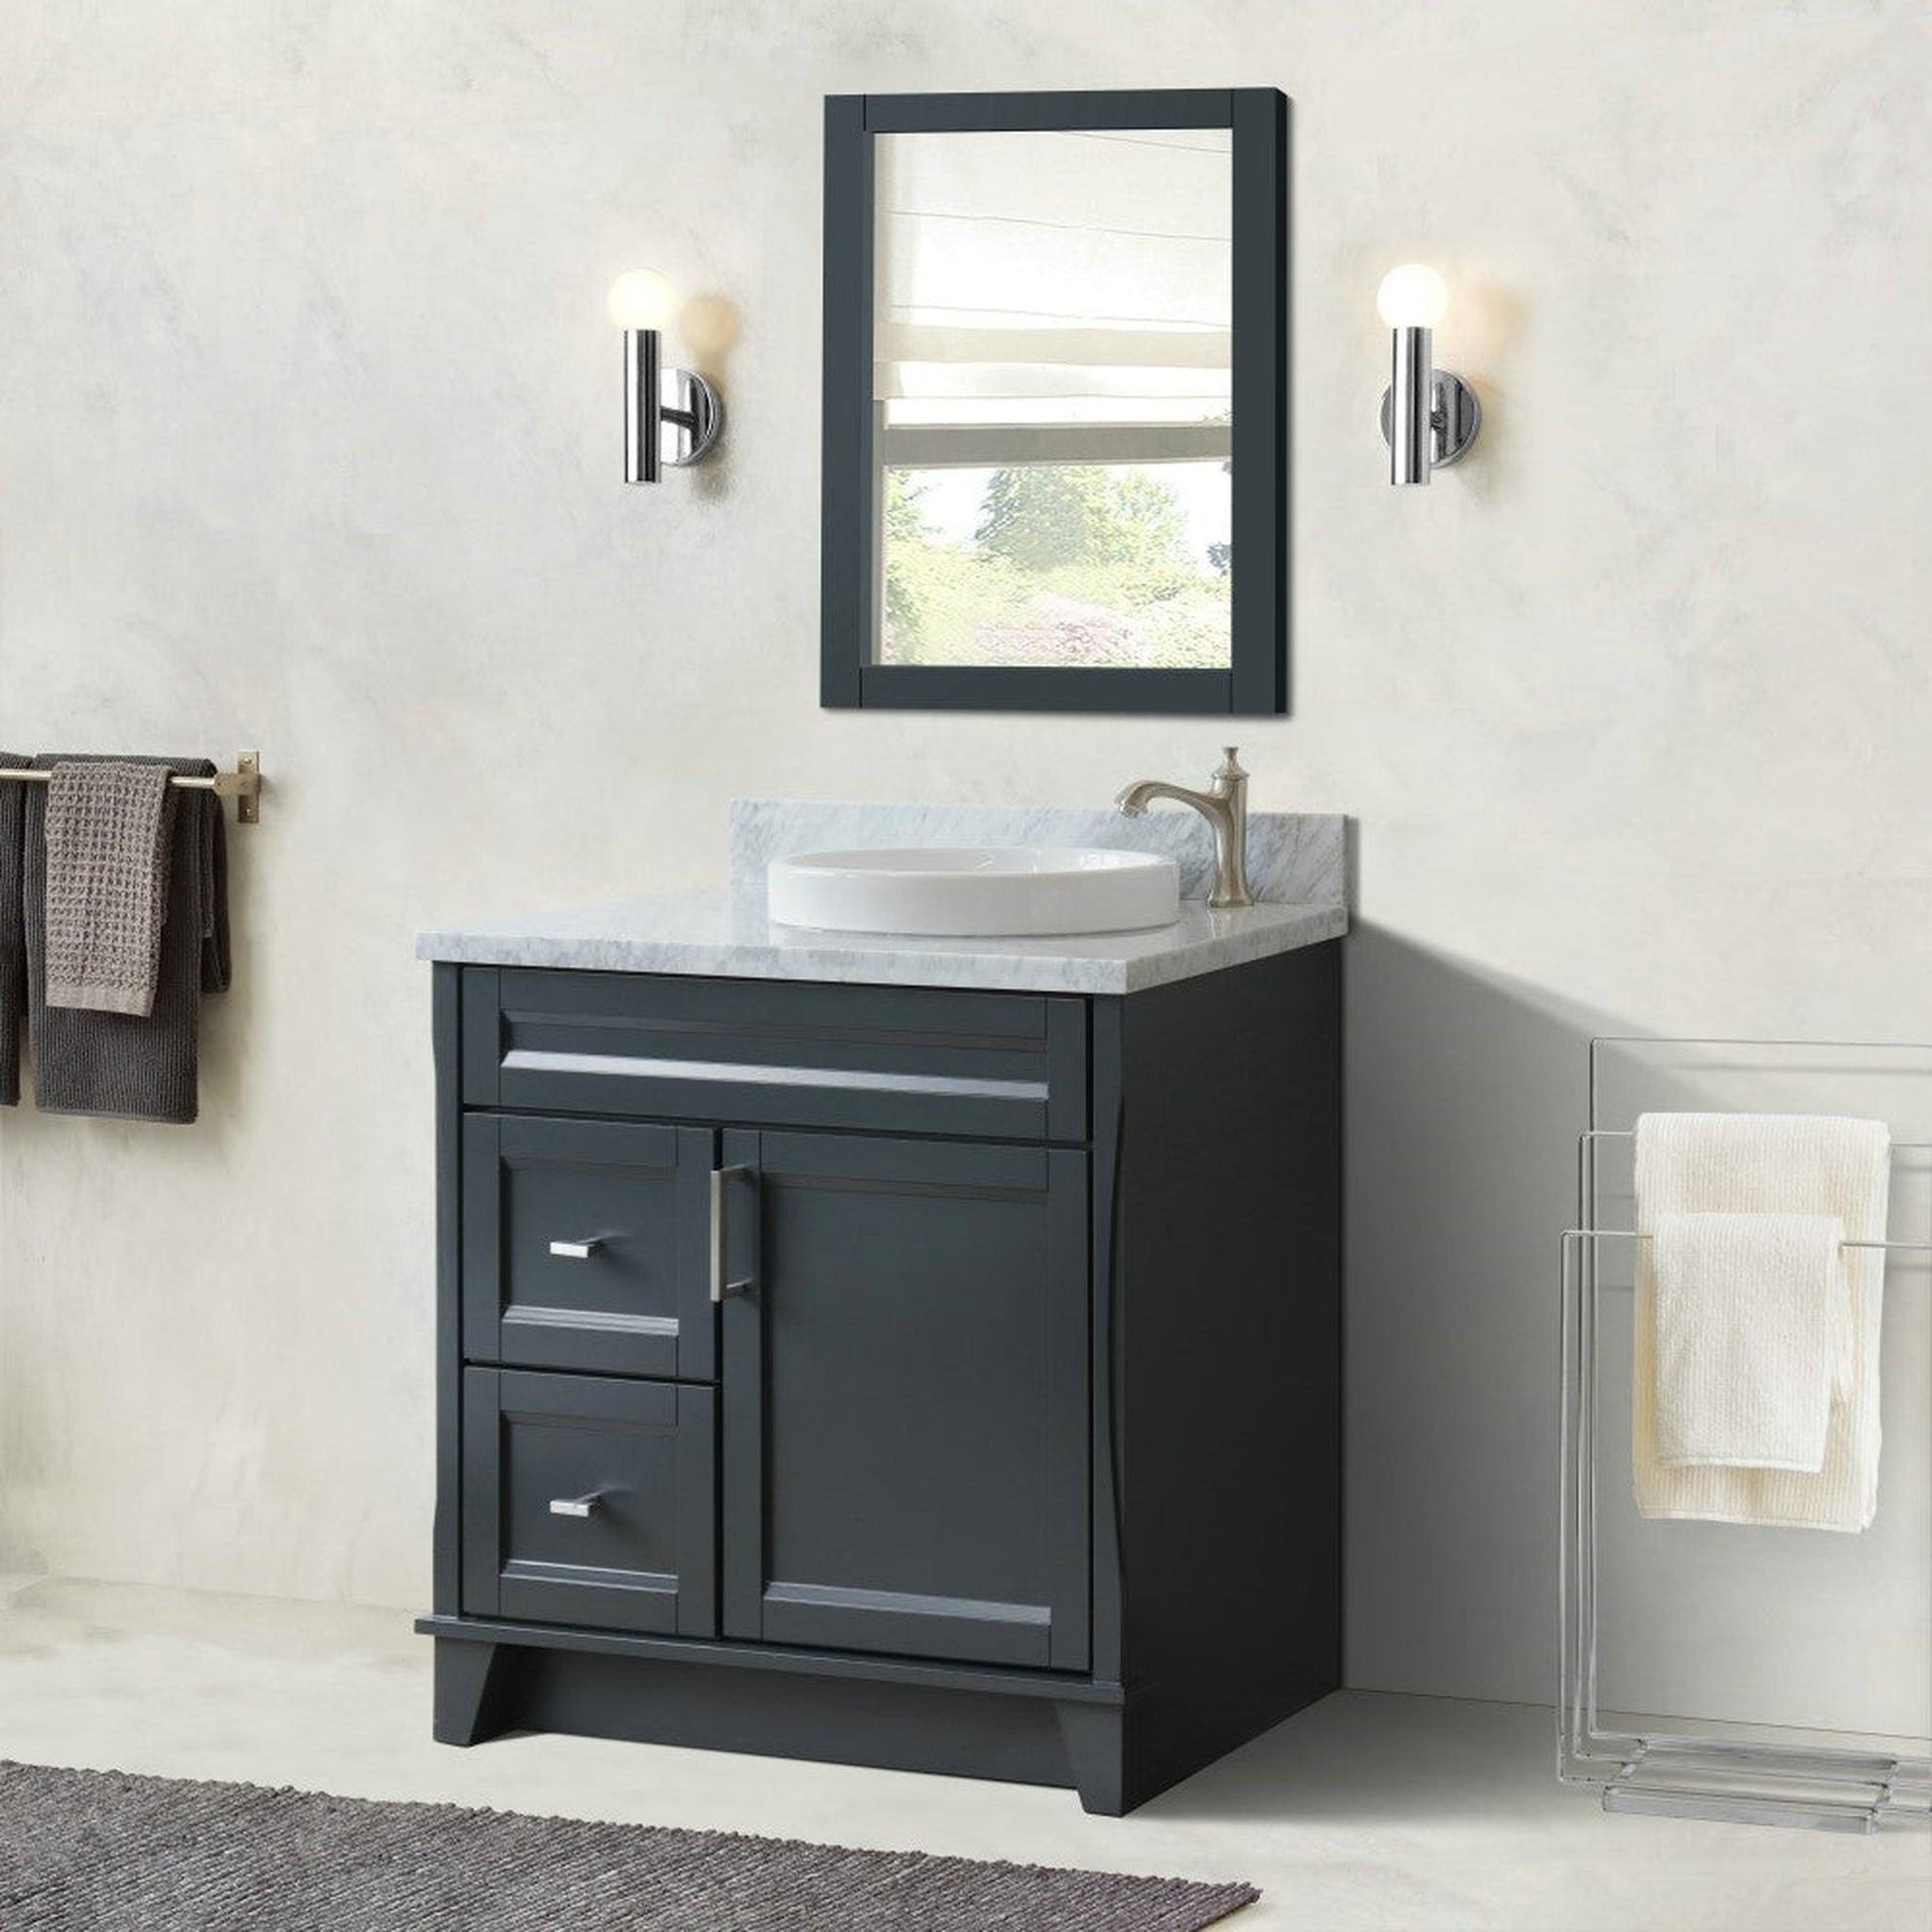 Bellaterra Home Terni 37" 1-Door 2-Drawer Dark Gray Freestanding Vanity Set With Ceramic Right Offset Vessel Sink and White Carrara Marble Top, and Right Door Base